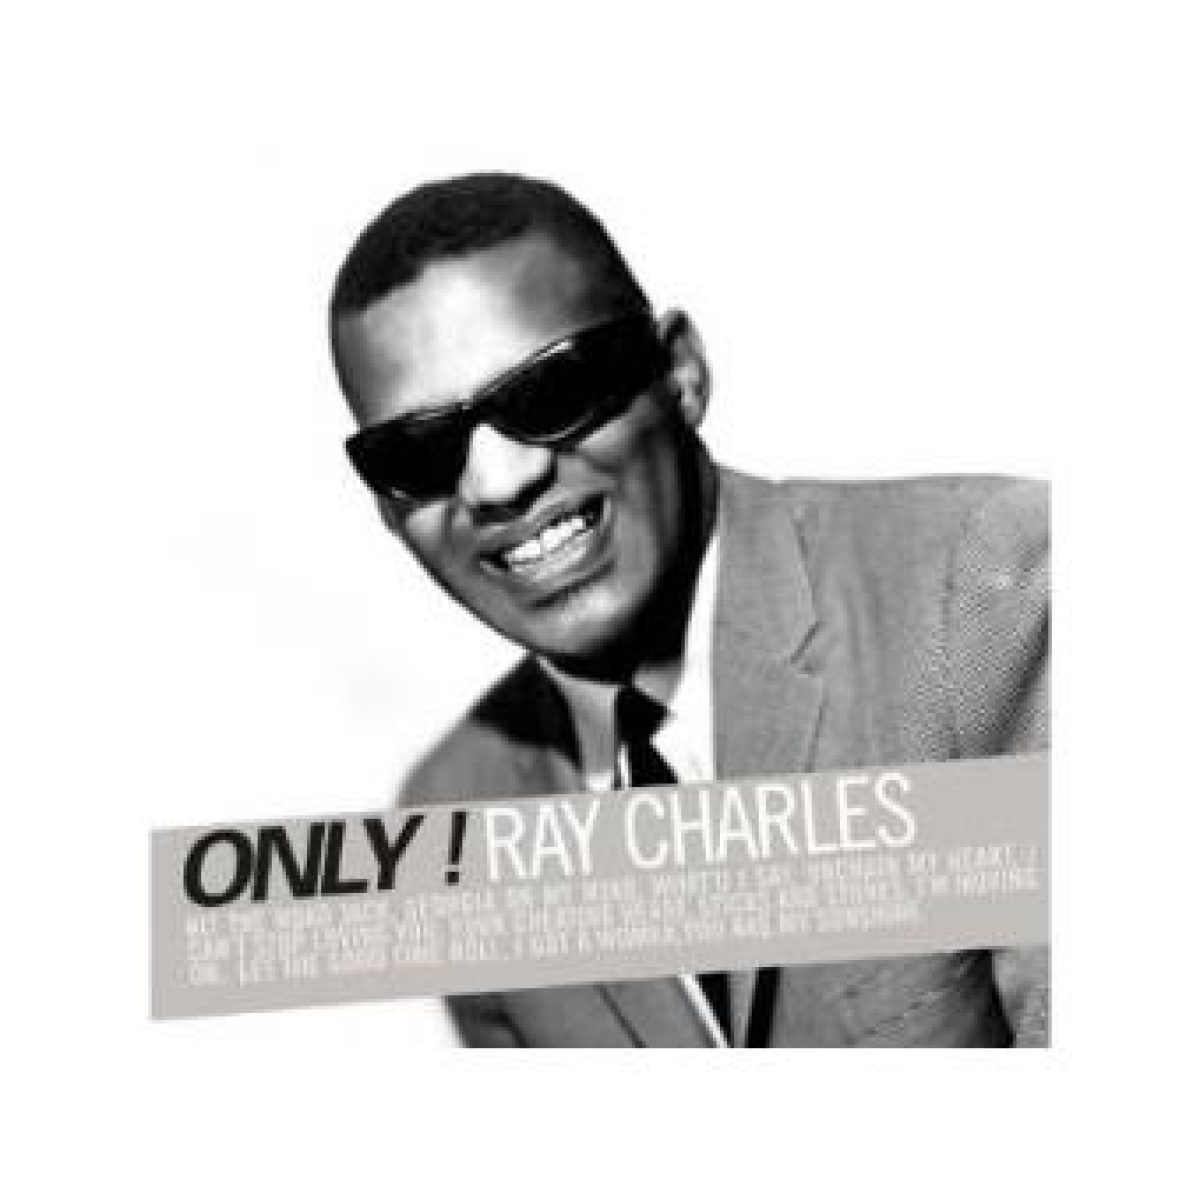 Ray Charles, Only!